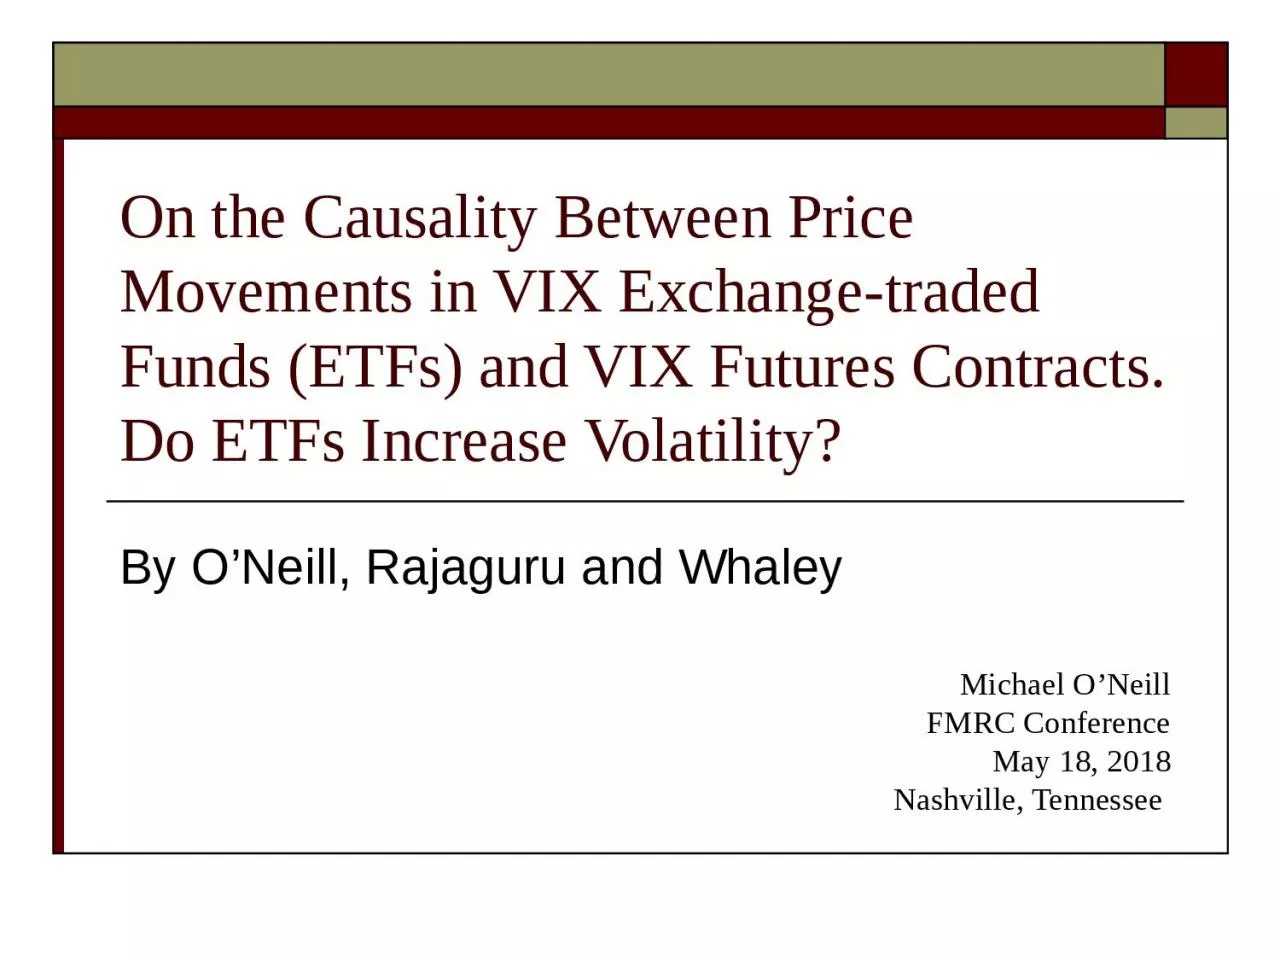 On the Causality Between Price Movements in VIX Exchange-traded Funds (ETFs) and VIX Futures